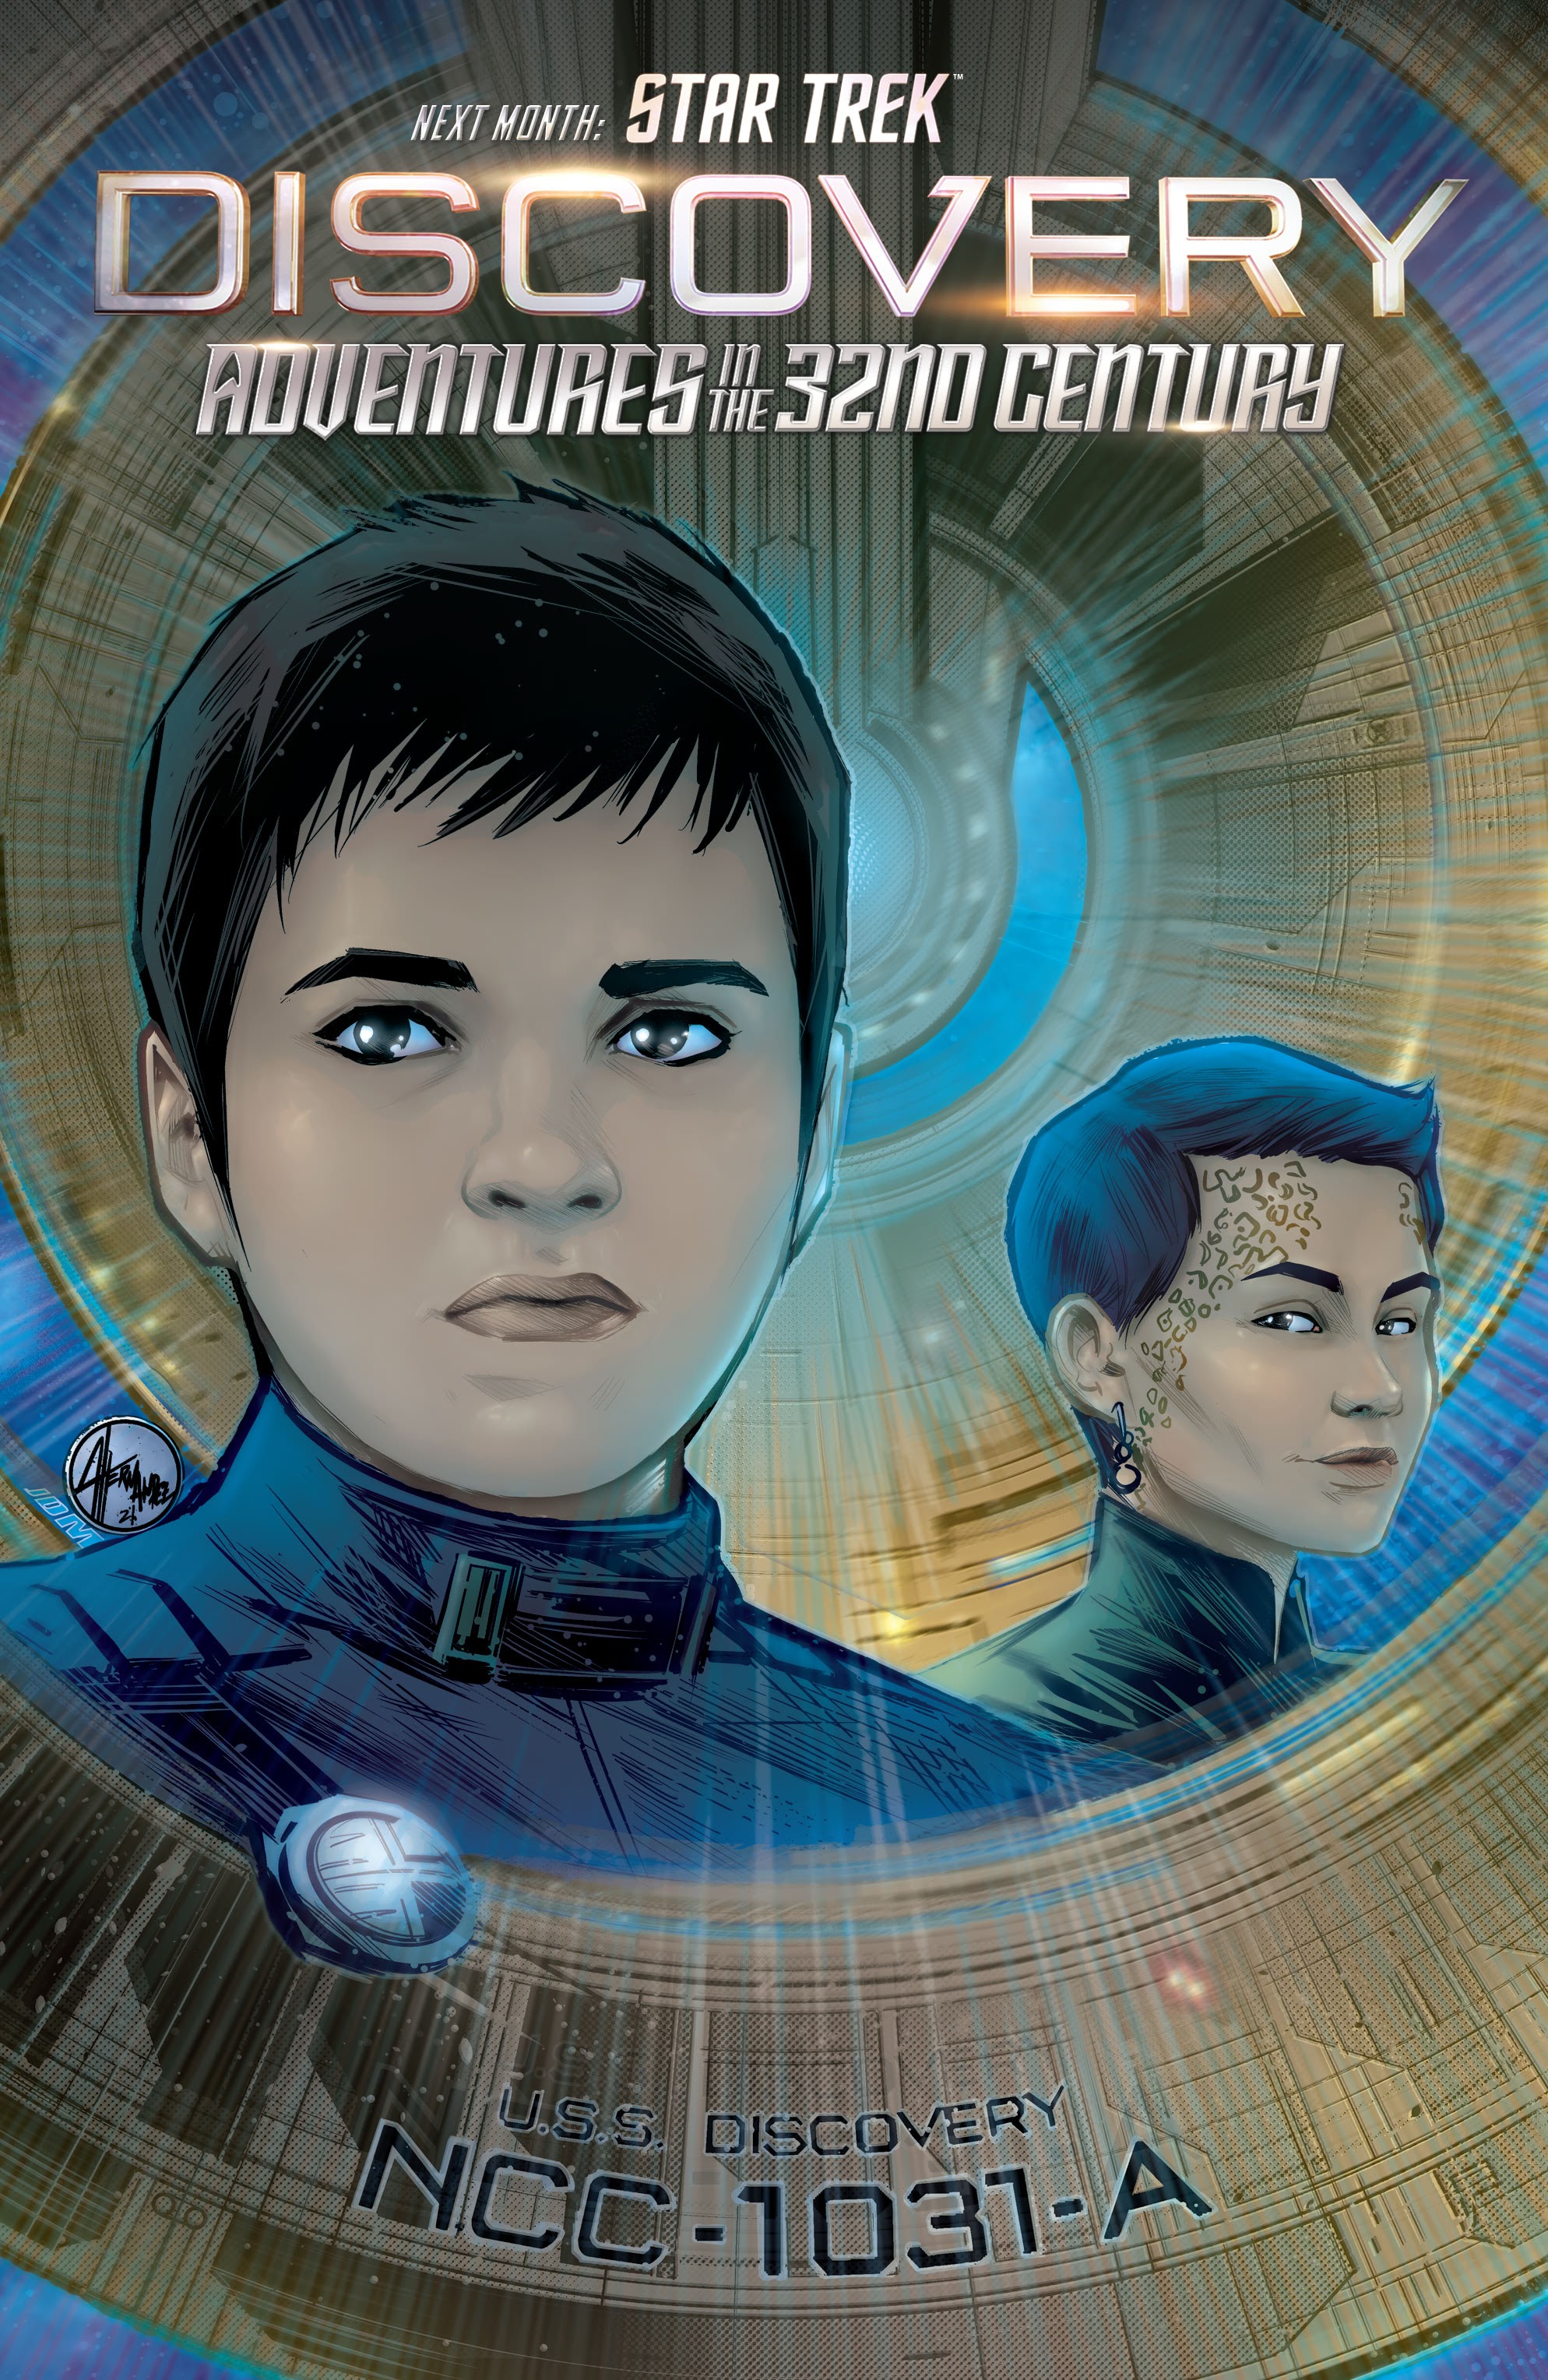 Read online Star Trek: Discovery - Adventures in the 32nd Century comic -  Issue #1 - 23